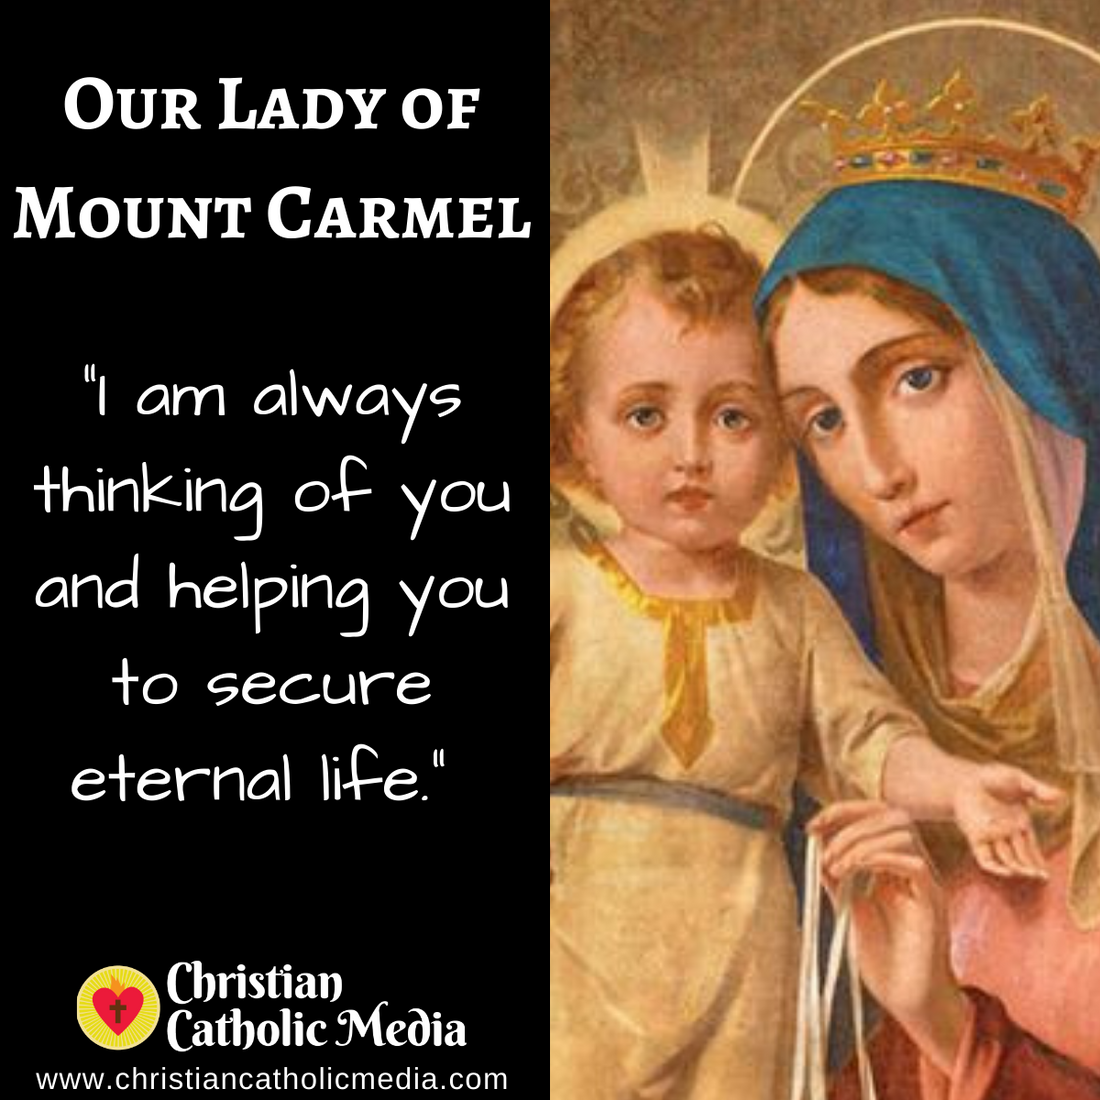 Our Lady of Mount Carmel - Friday July 16, 2021